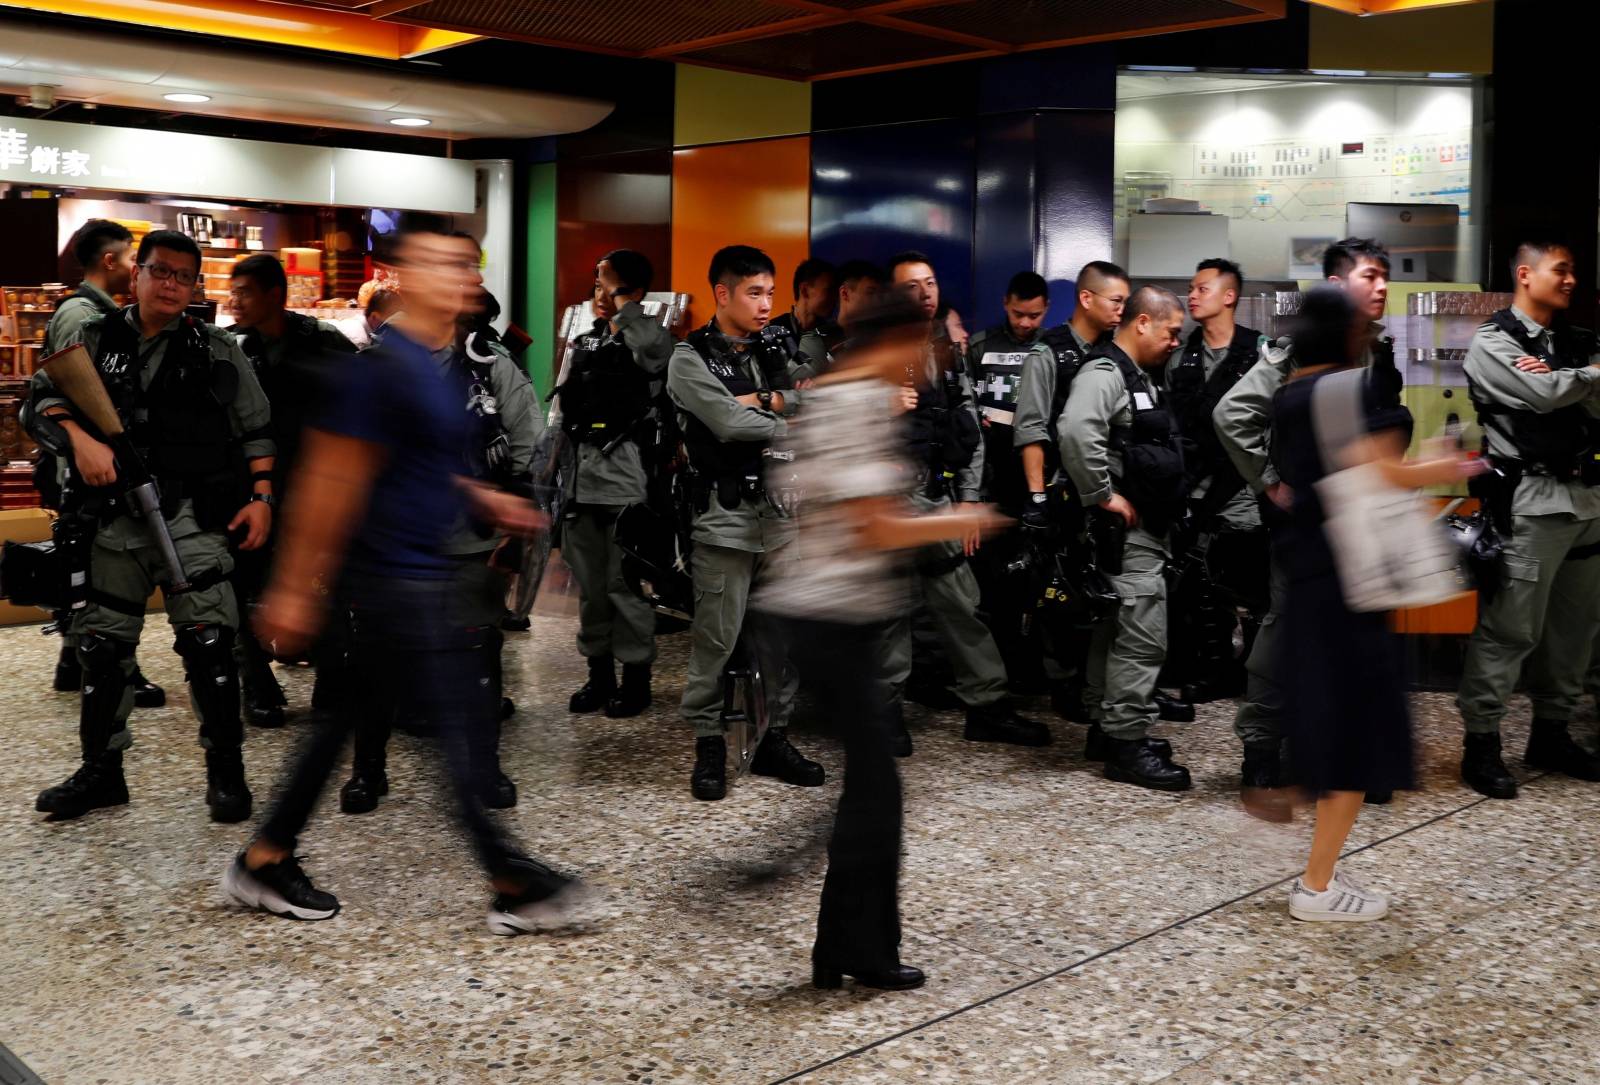 Riot police wait at a Mass Transit Railway (MTR) station as commuters walk past to catch a subway train, in Hong Kong